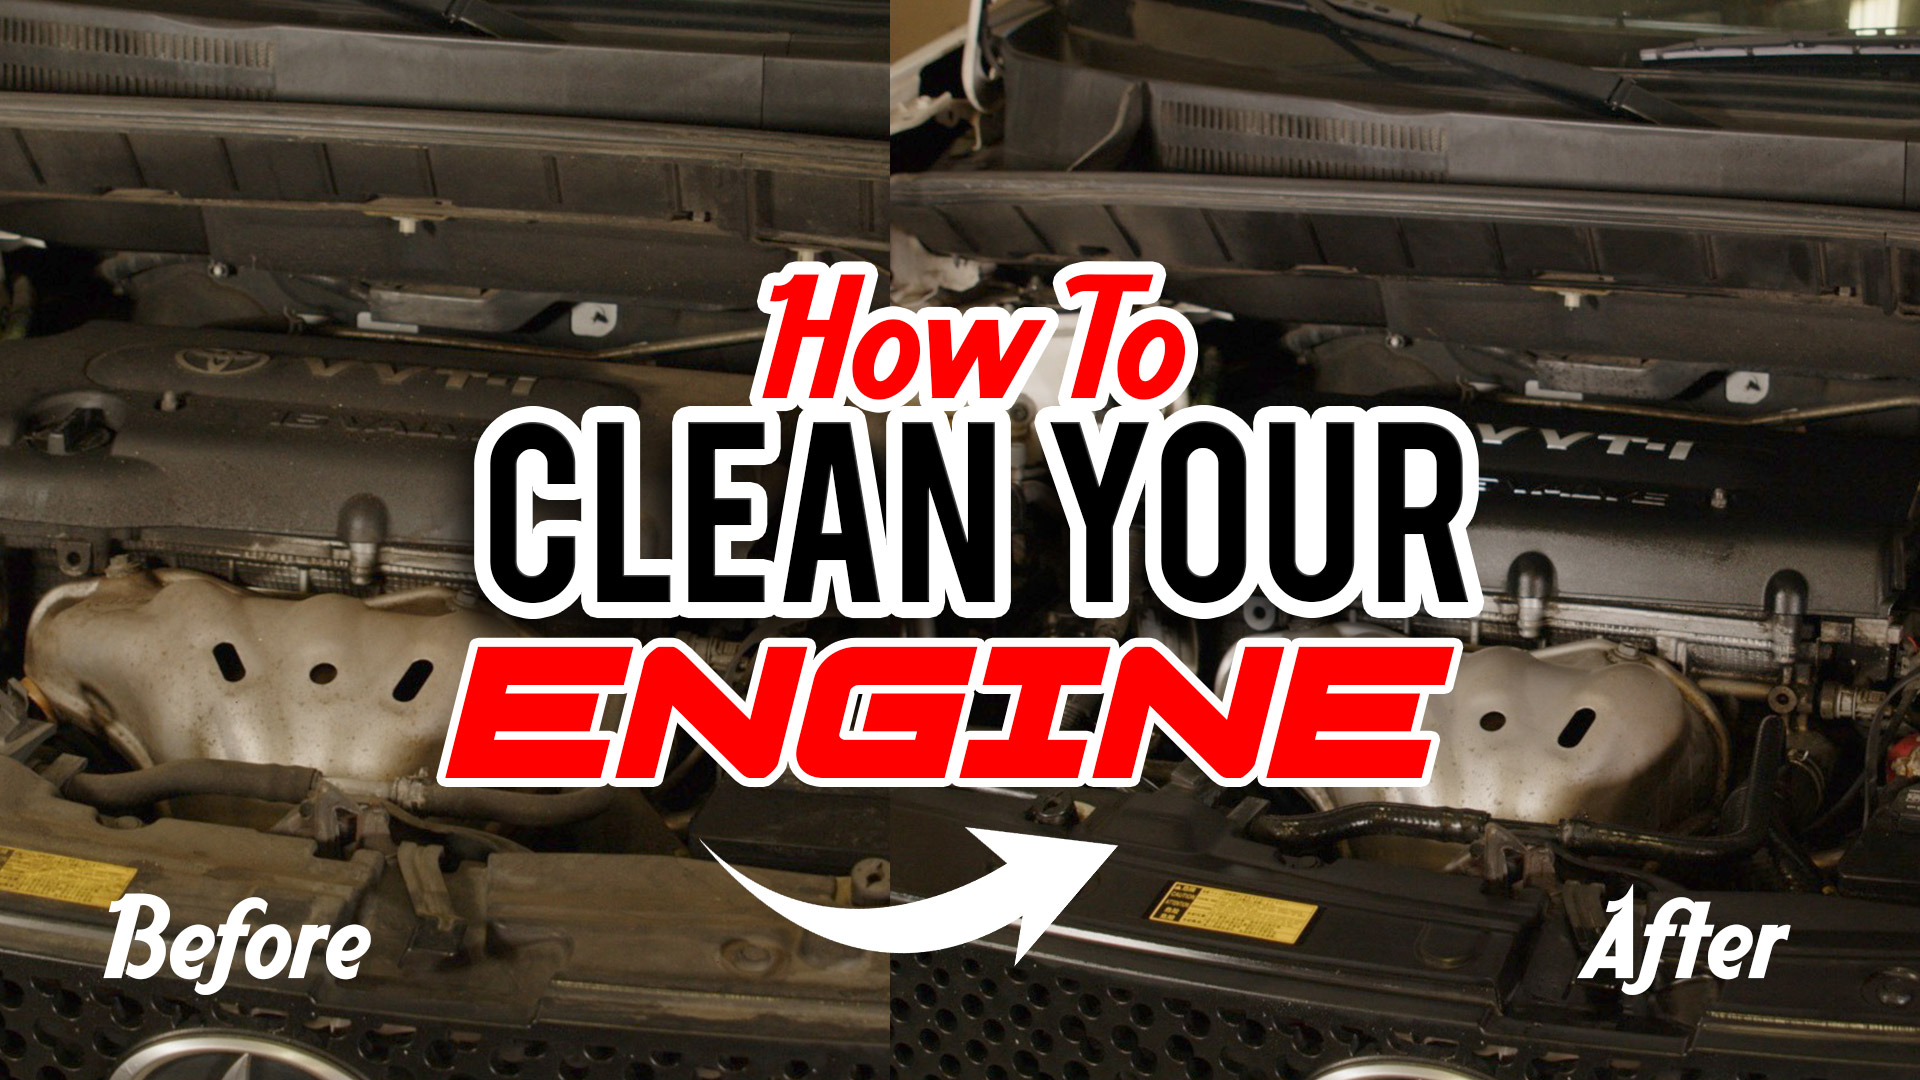 Engine Cleaning-How to Car Detail blog